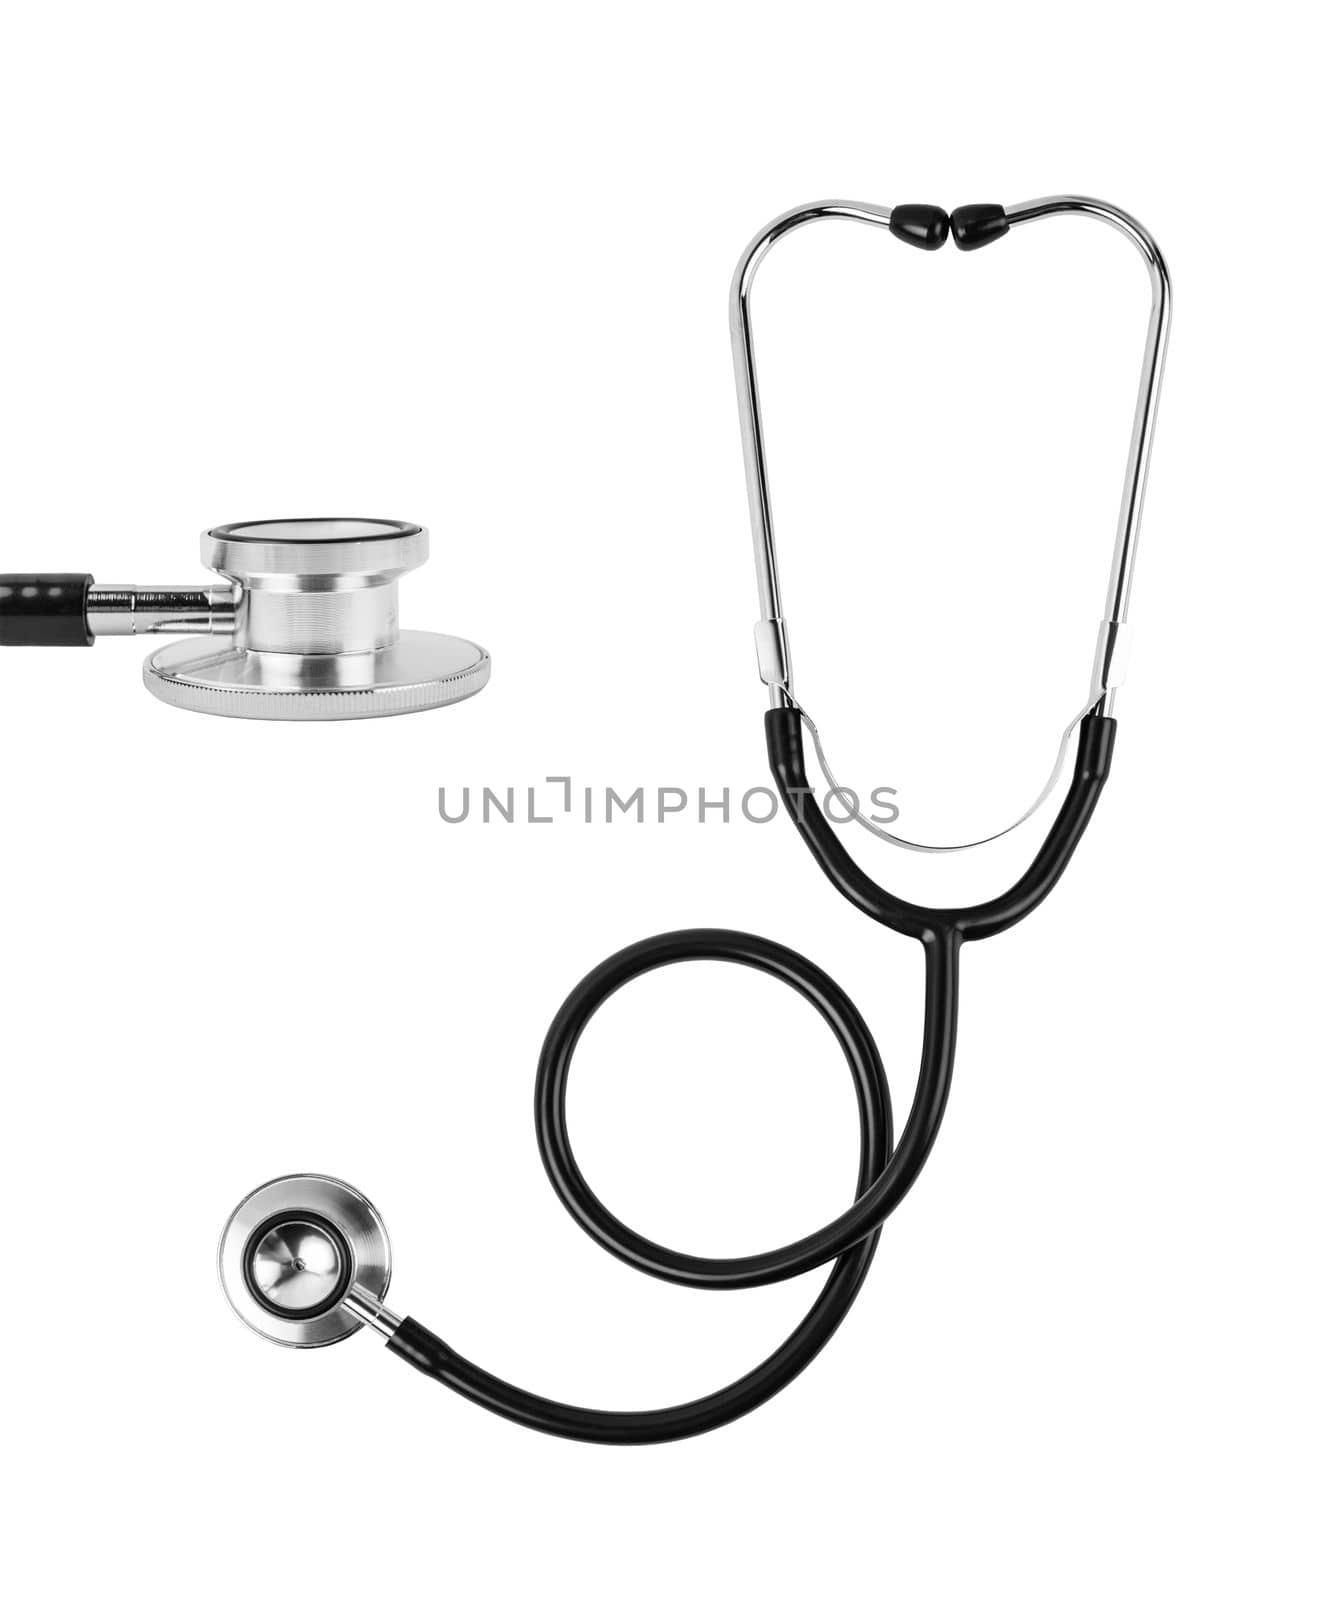 Black stethoscope medical on white isolate background. Saved Clipping path.